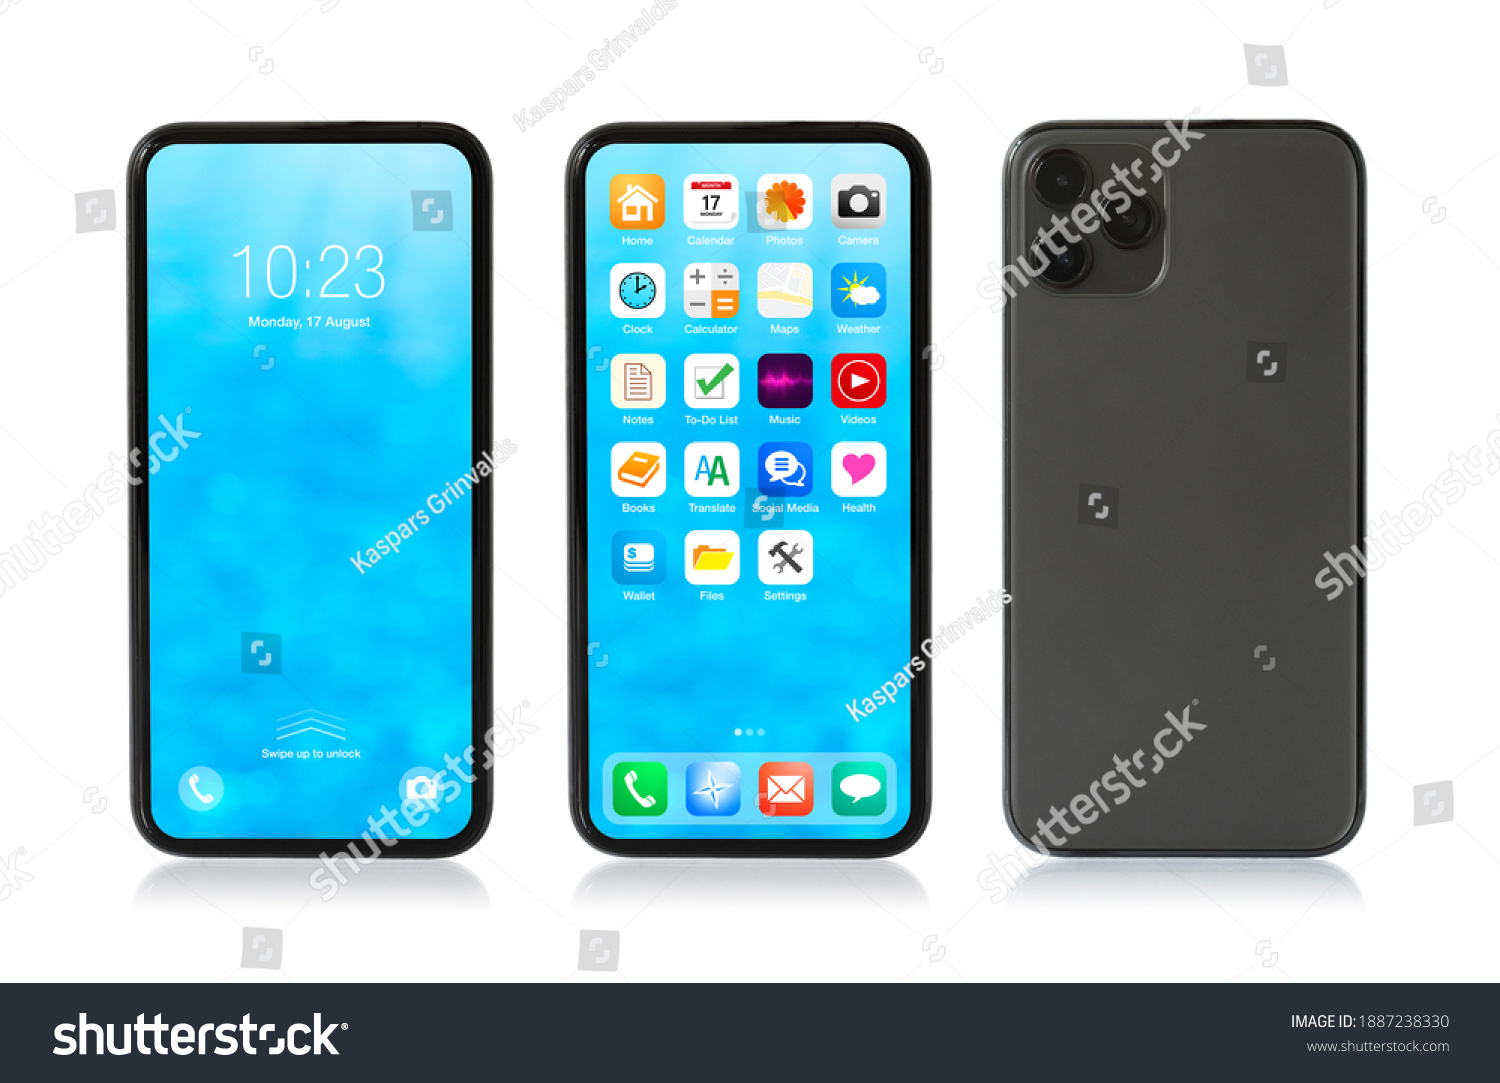 Mockup photo of isolated mobile phone showing locked and home screens, and back side view. #1887238330